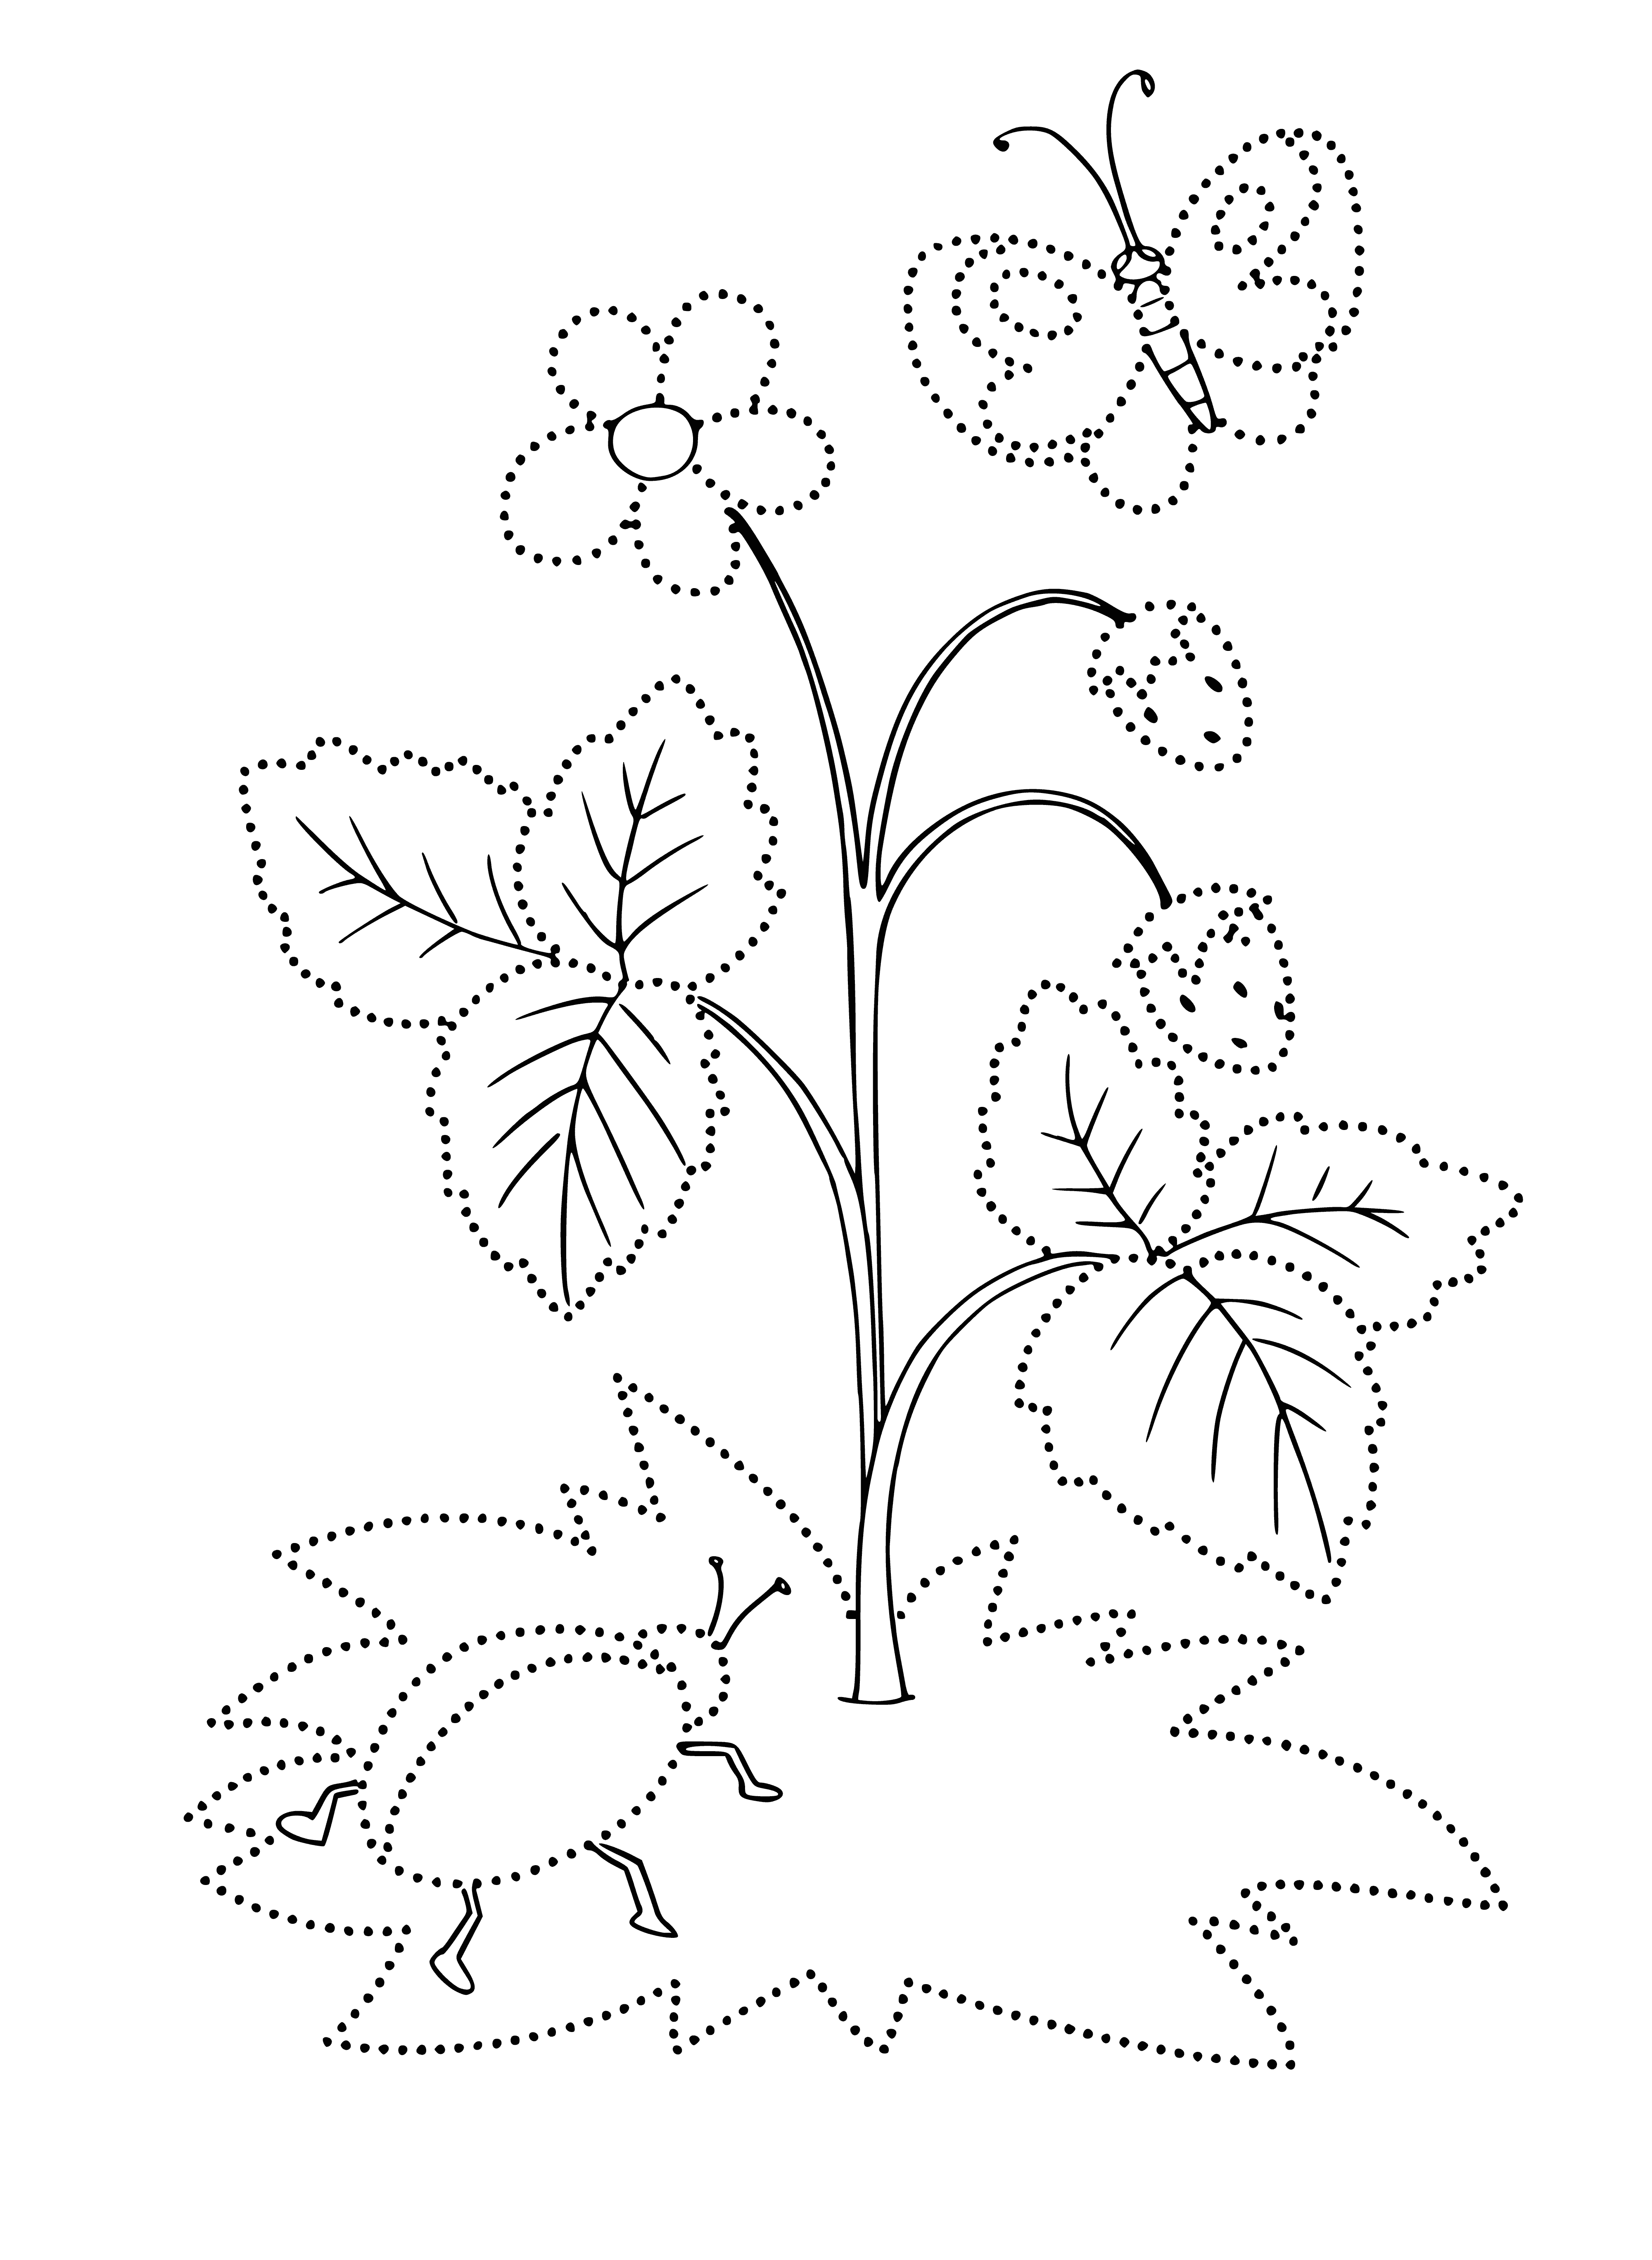 coloring page: Small, red fruit with green stem, slightly wrinkled w/ small seeds on surface.